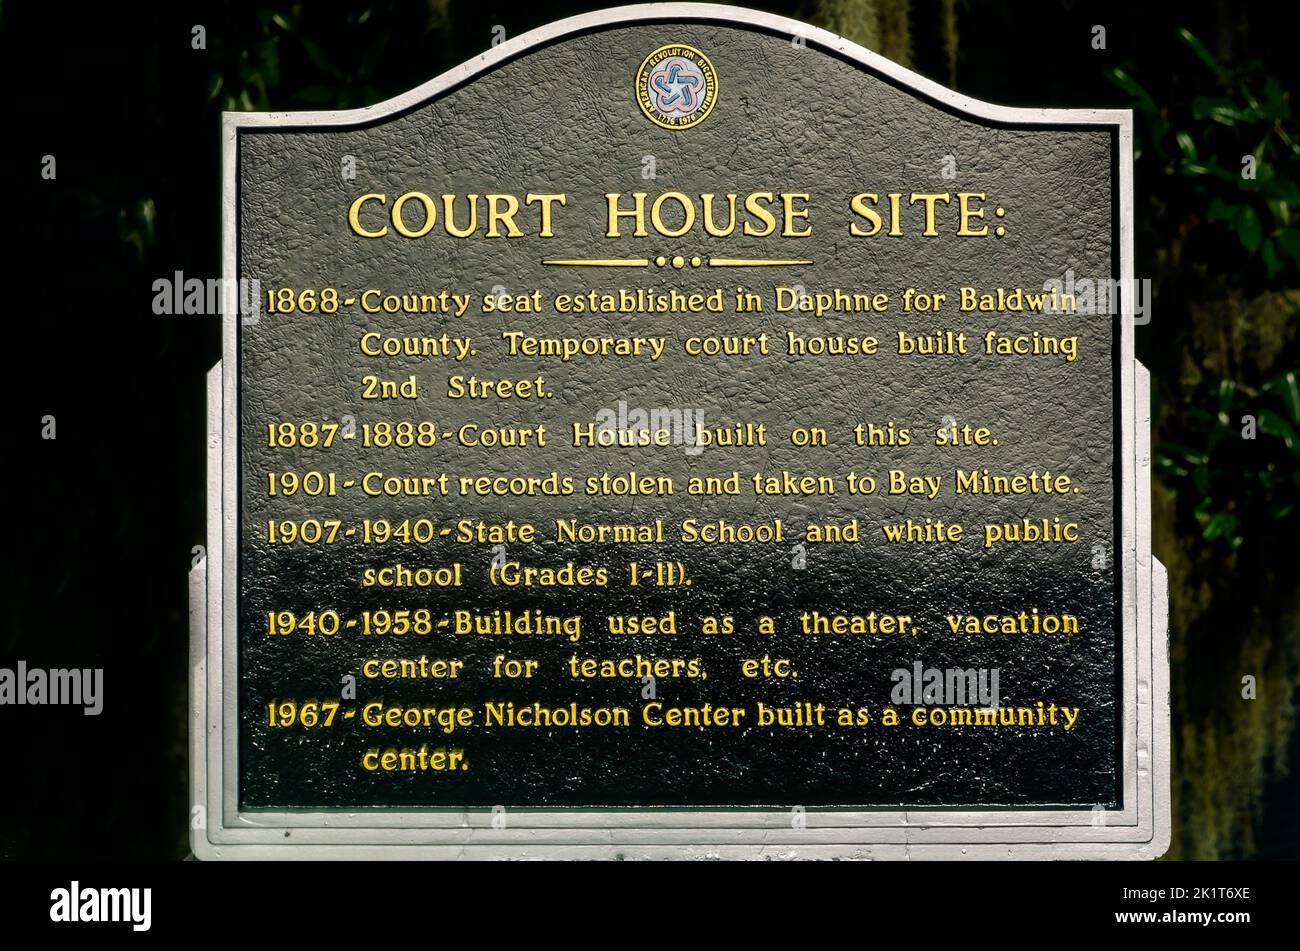 The Daphne Court House Site is pictured, Sept. 8, 2022, in Daphne, Alabama. Baldwin County’s county seat was established in Daphne in 1868. Stock Photo